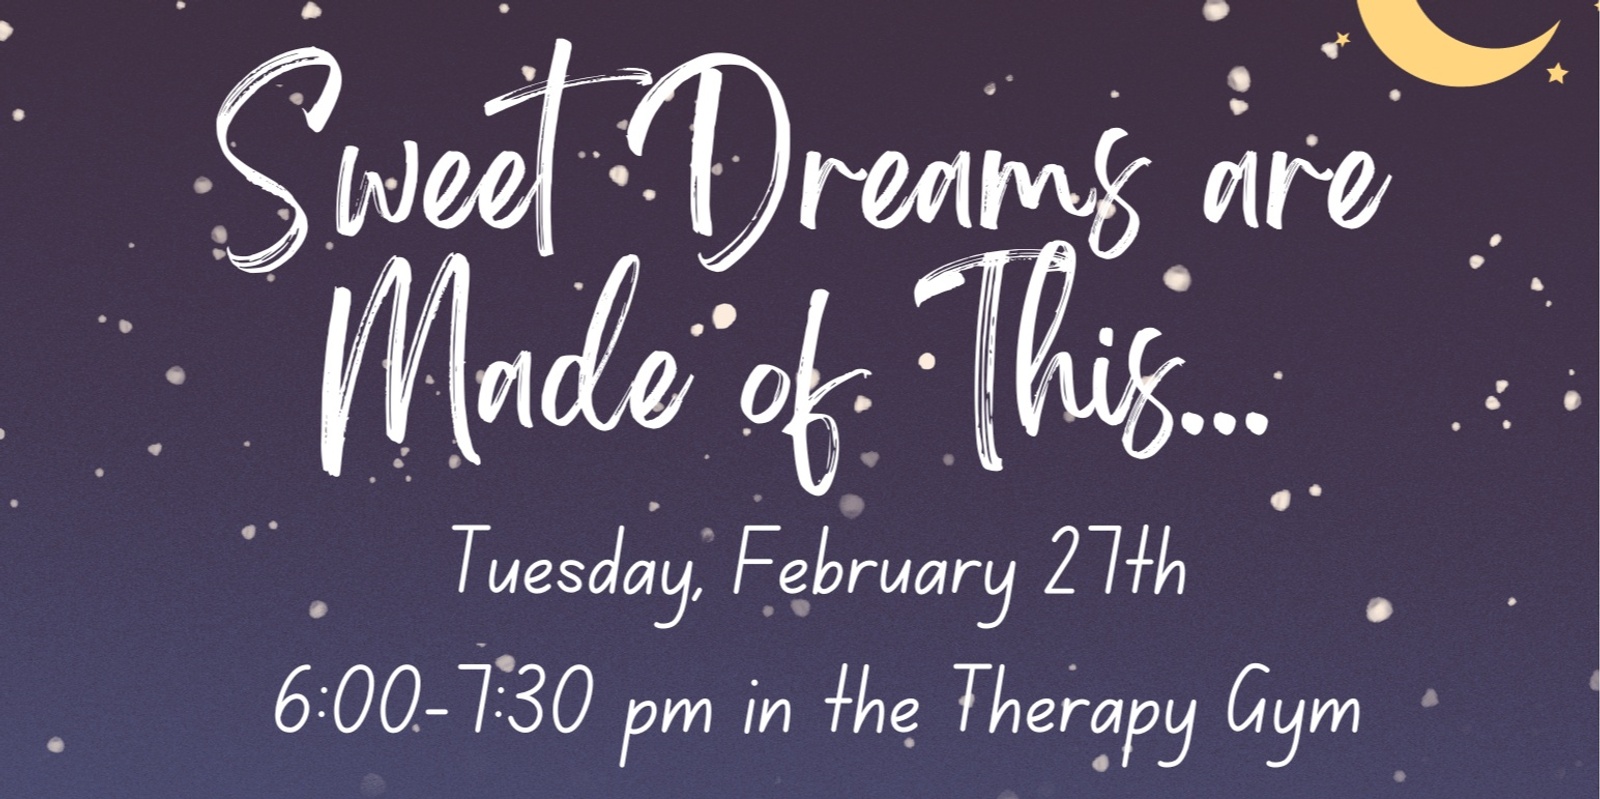 Parent Workshop: Sweet dreams are made of this..